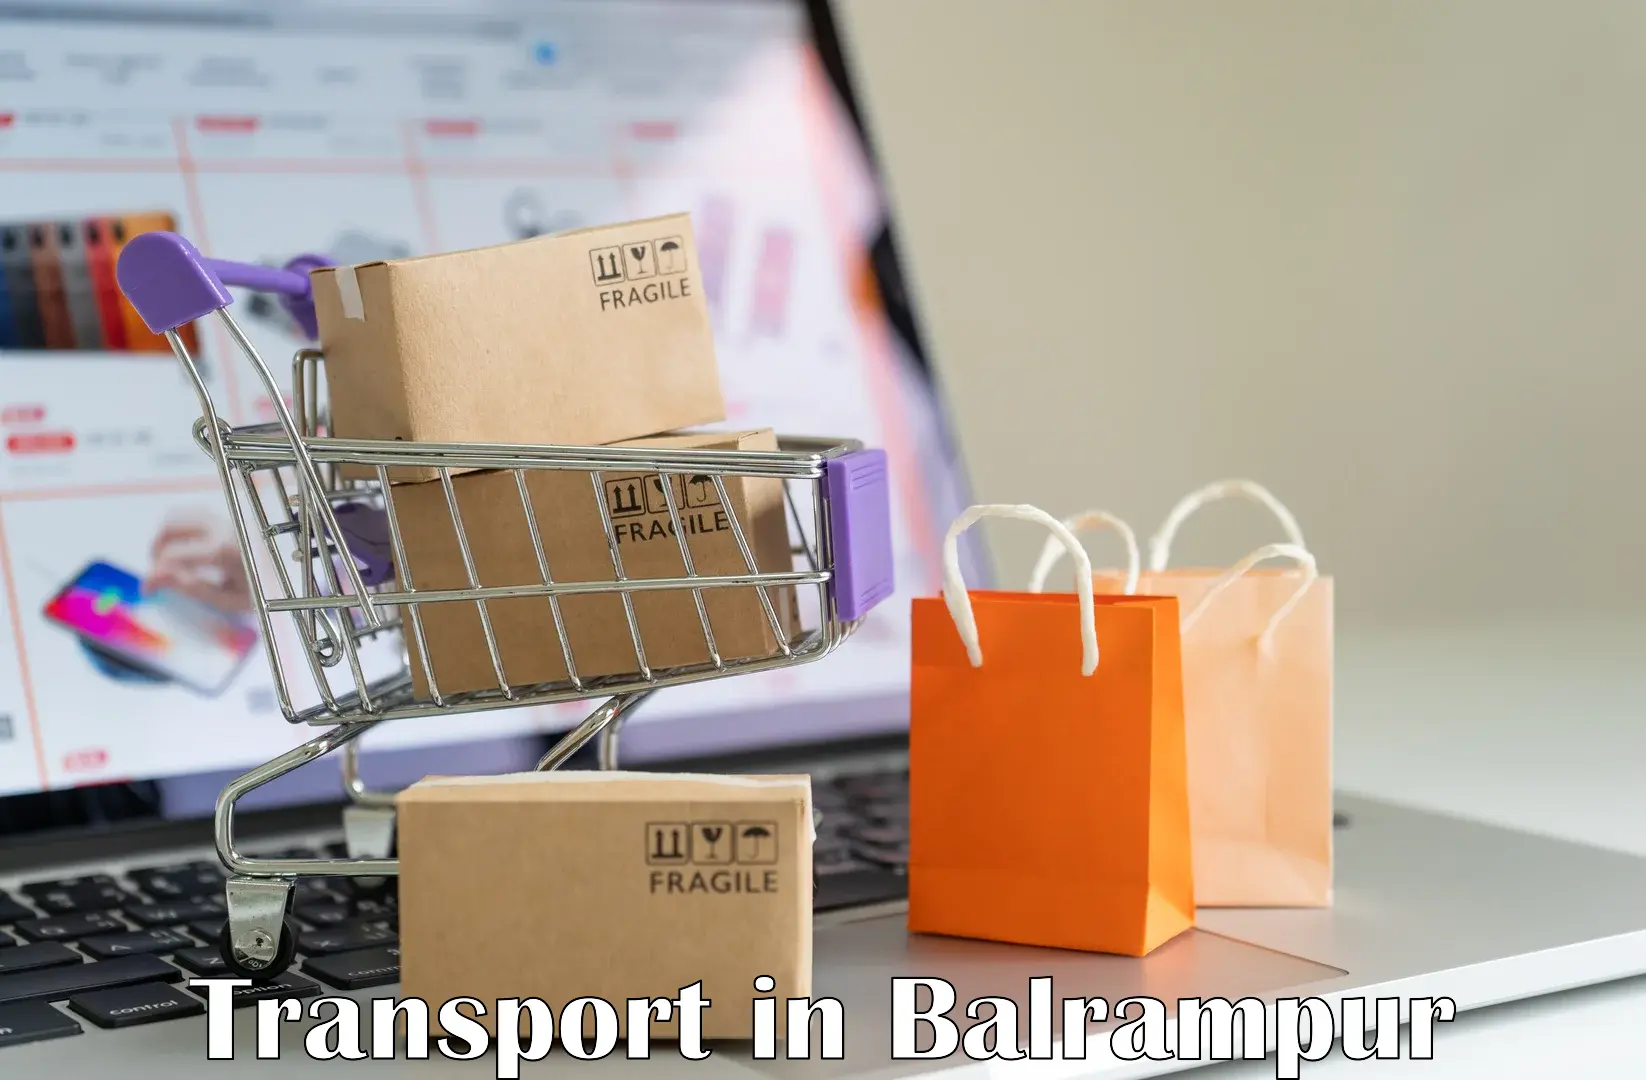 Daily transport service in Balrampur